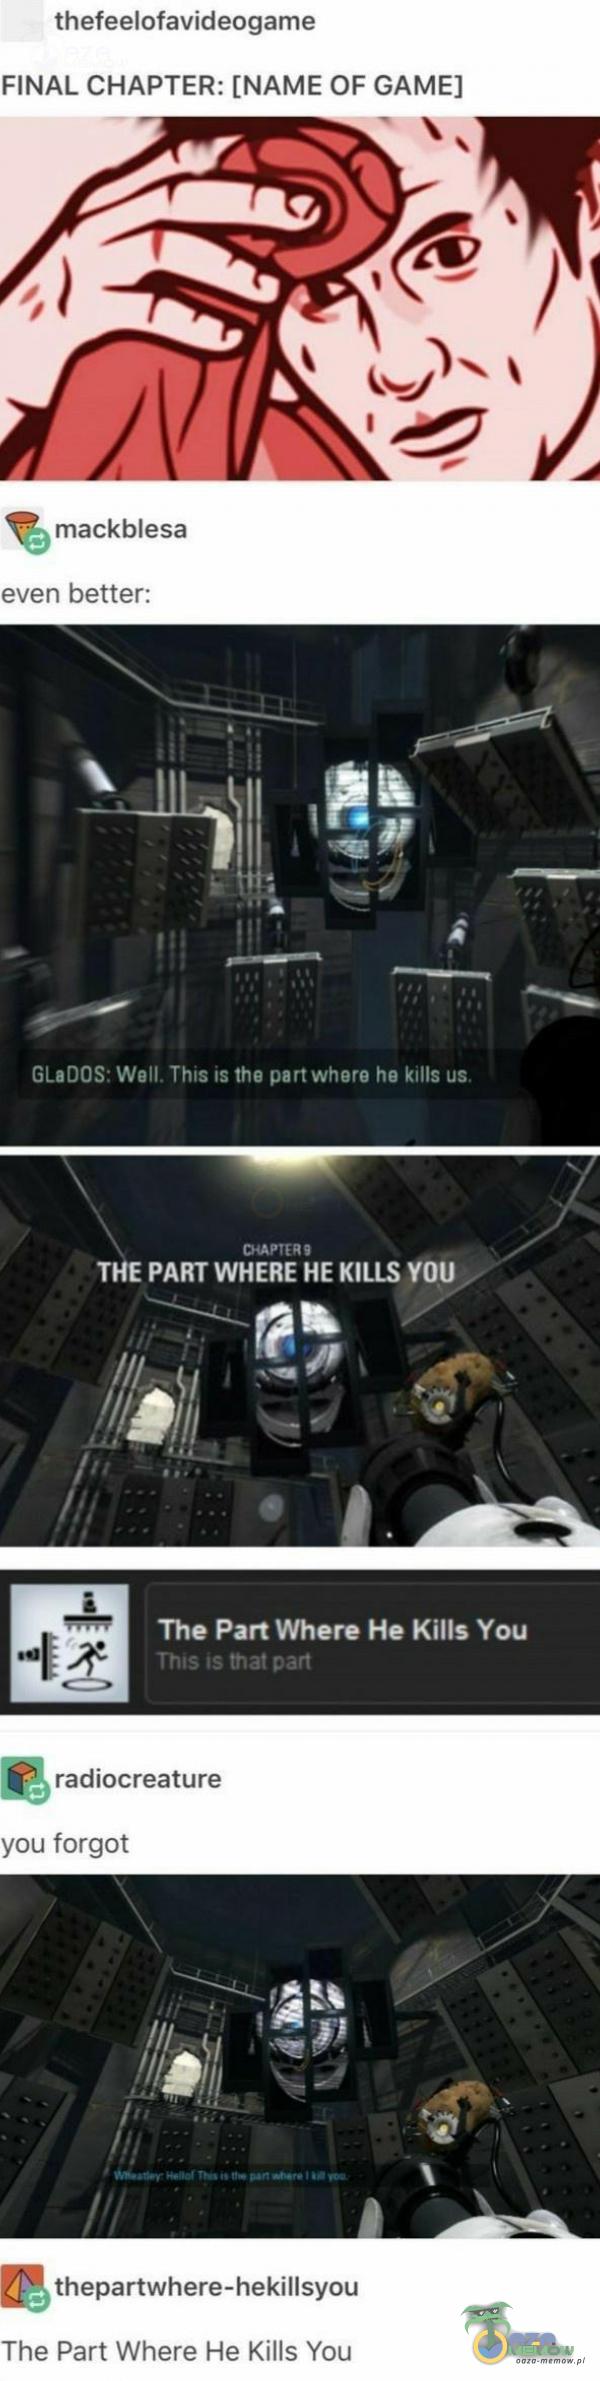  thefeelofavideogame FINAL CHAPTER: [NAME OF GAME] mackblesa even bełter: GLaDOS: Well. This is the part where he kills us. CHAPtERî THE PART WHERE HE KILLS YOU The Part Where He Kilis You Thłs that part radiocreature you forgot...